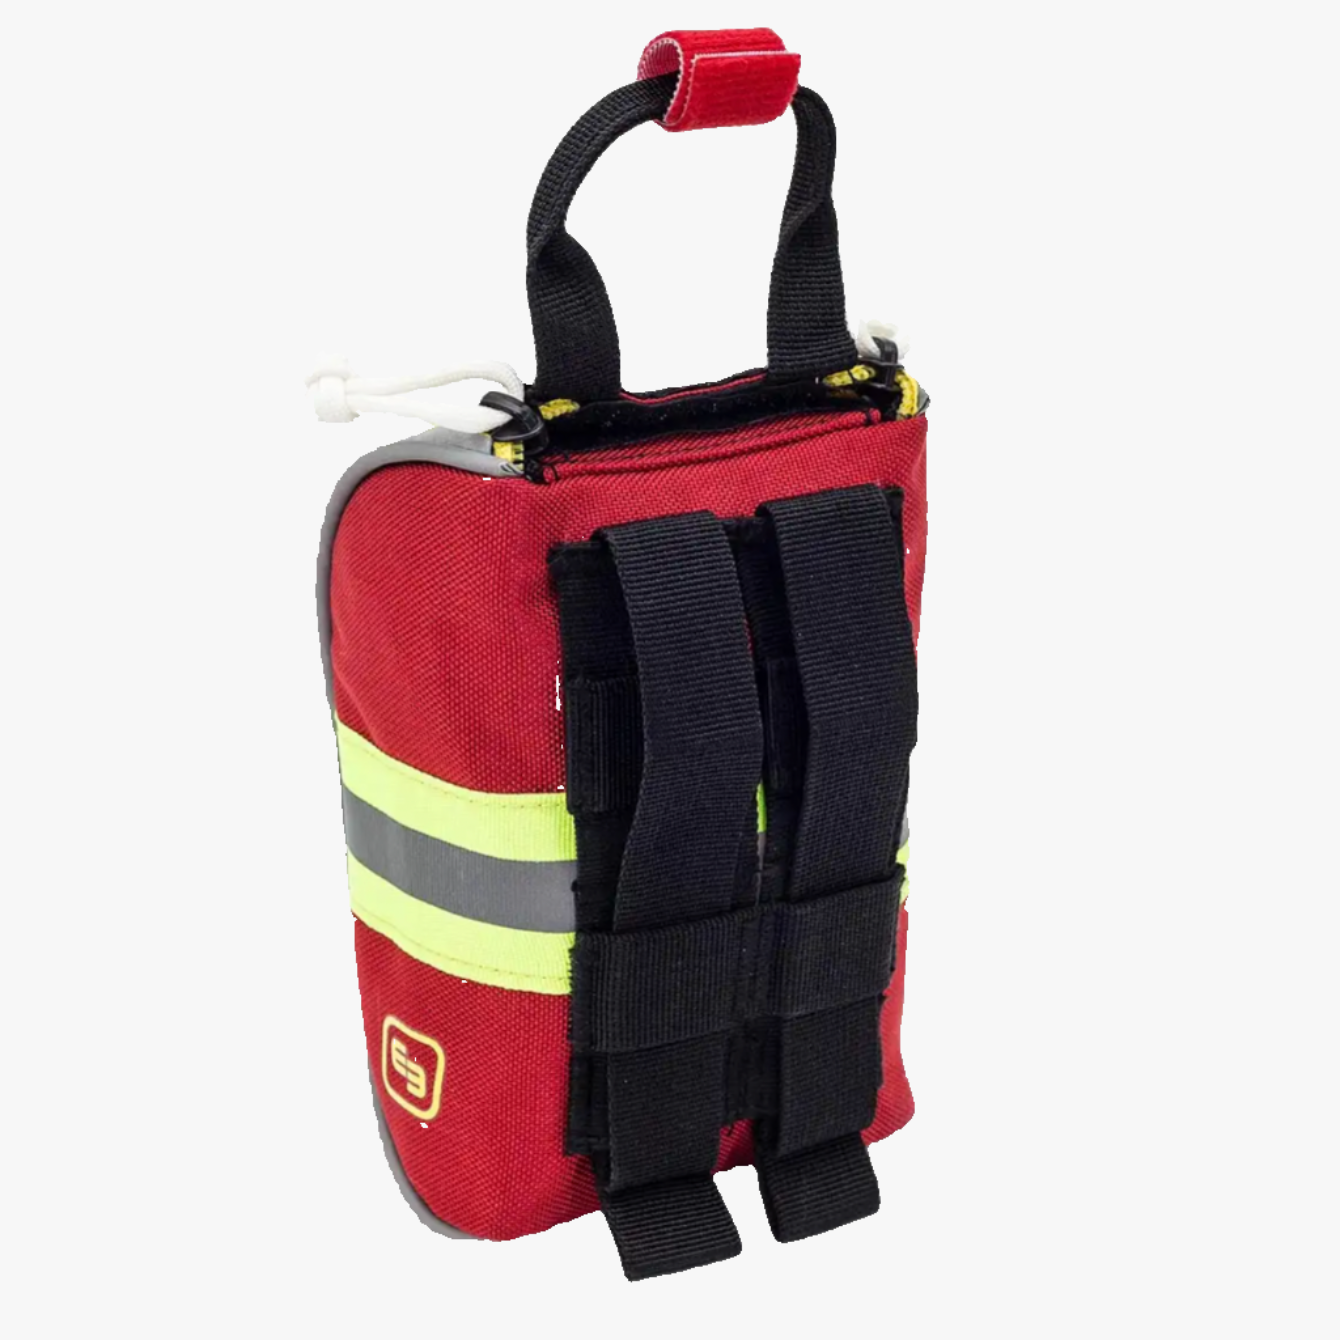 Elite Bags COMPACT first aid bag for the hip red